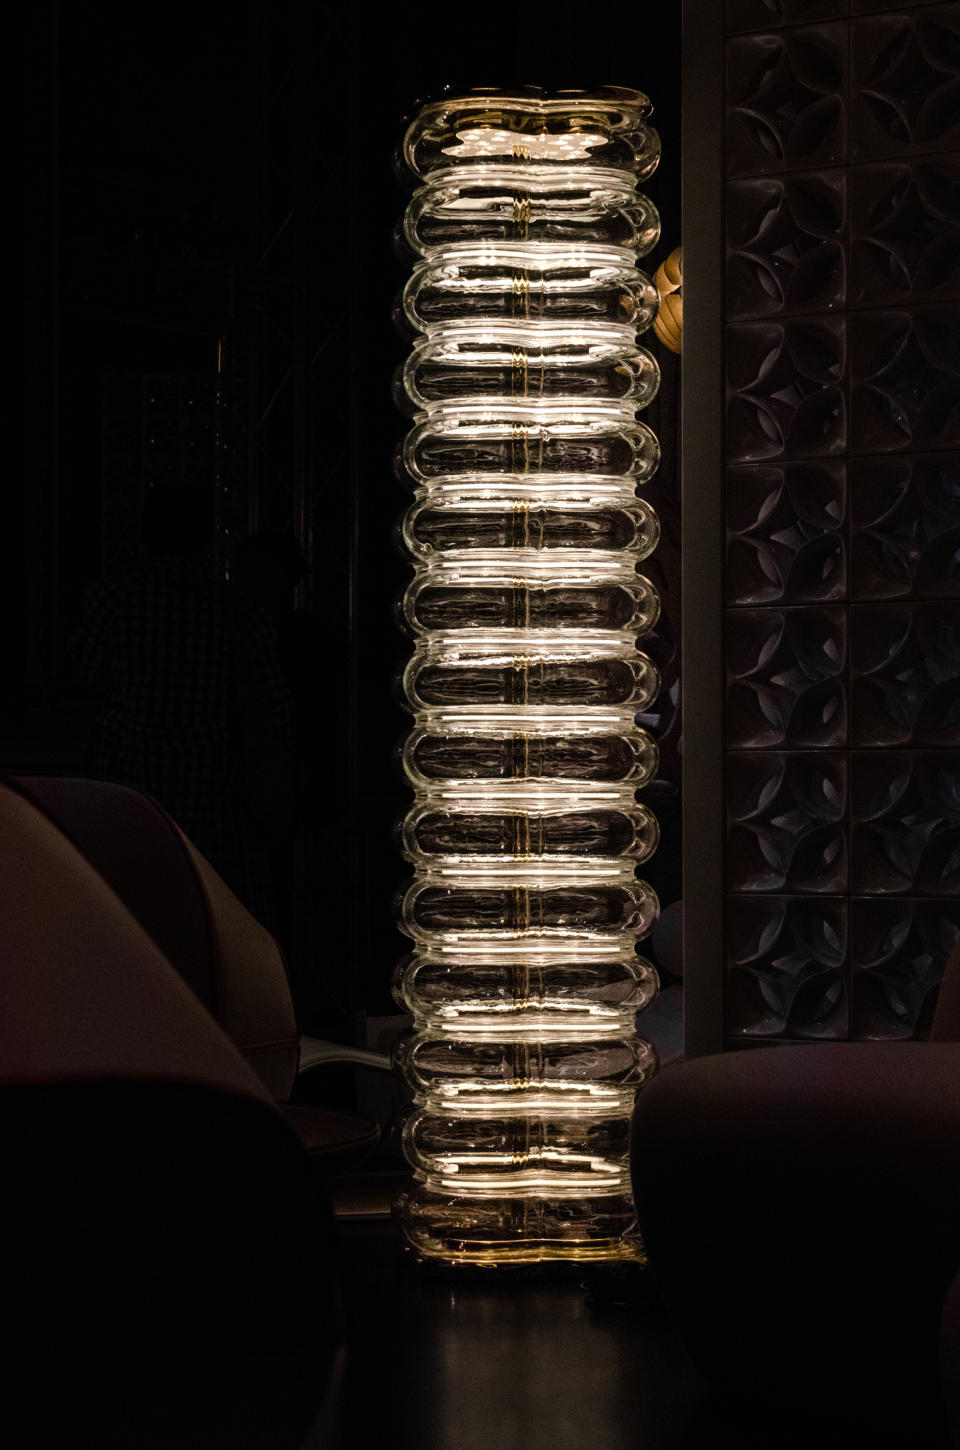 The Flower Tower lamp by Atelier Biagetti.